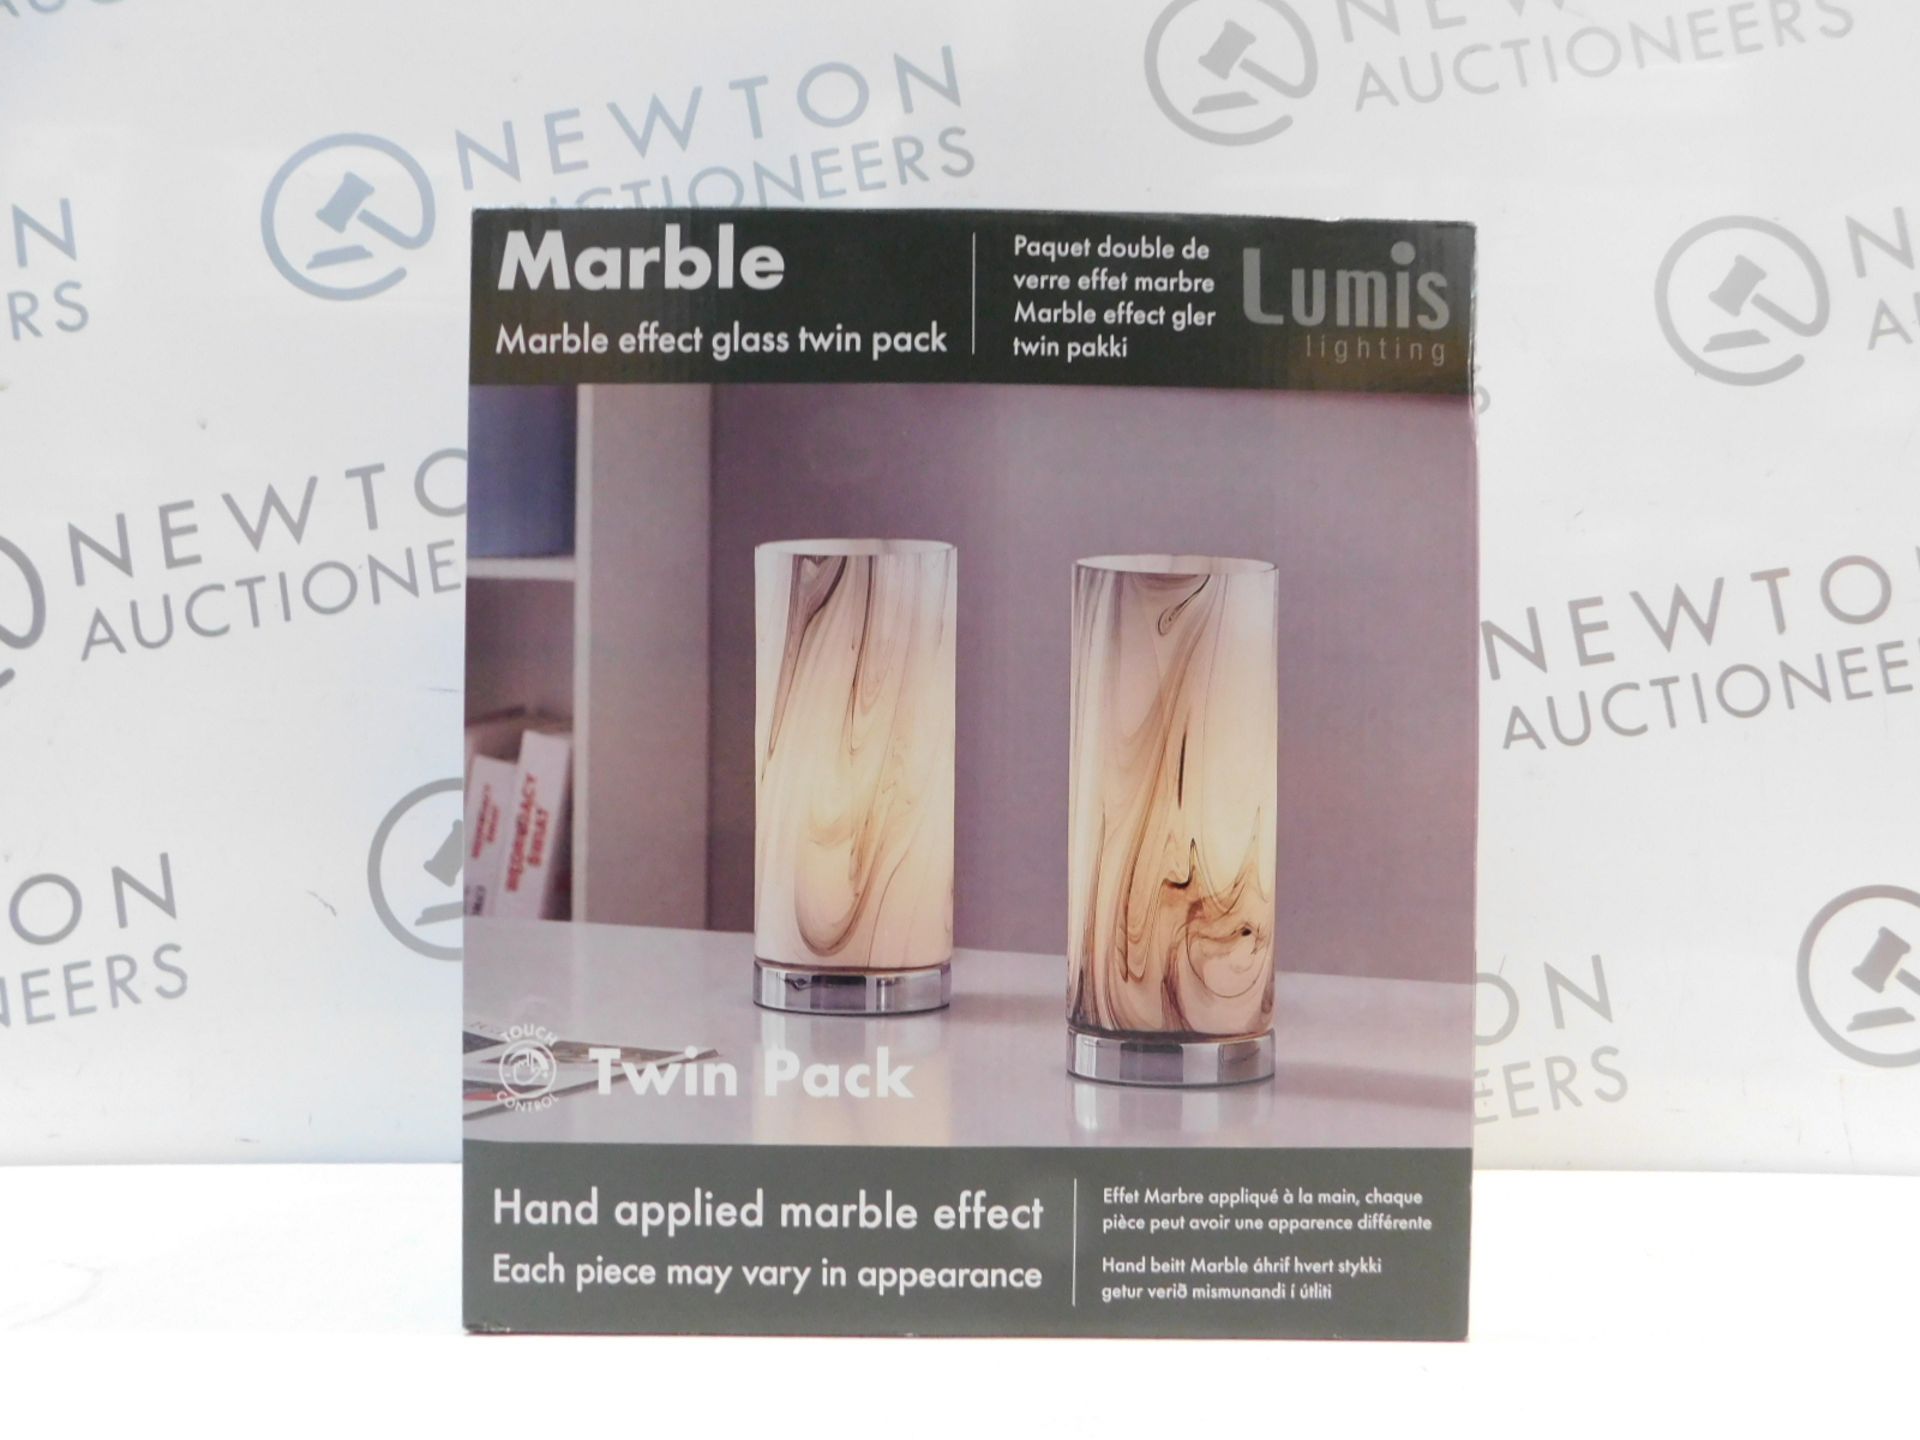 1 BOXED PAIR OF LUMIS LIGHTING MARBLE EFFECT GLASS TABLE LAMPS RRP Â£49.99